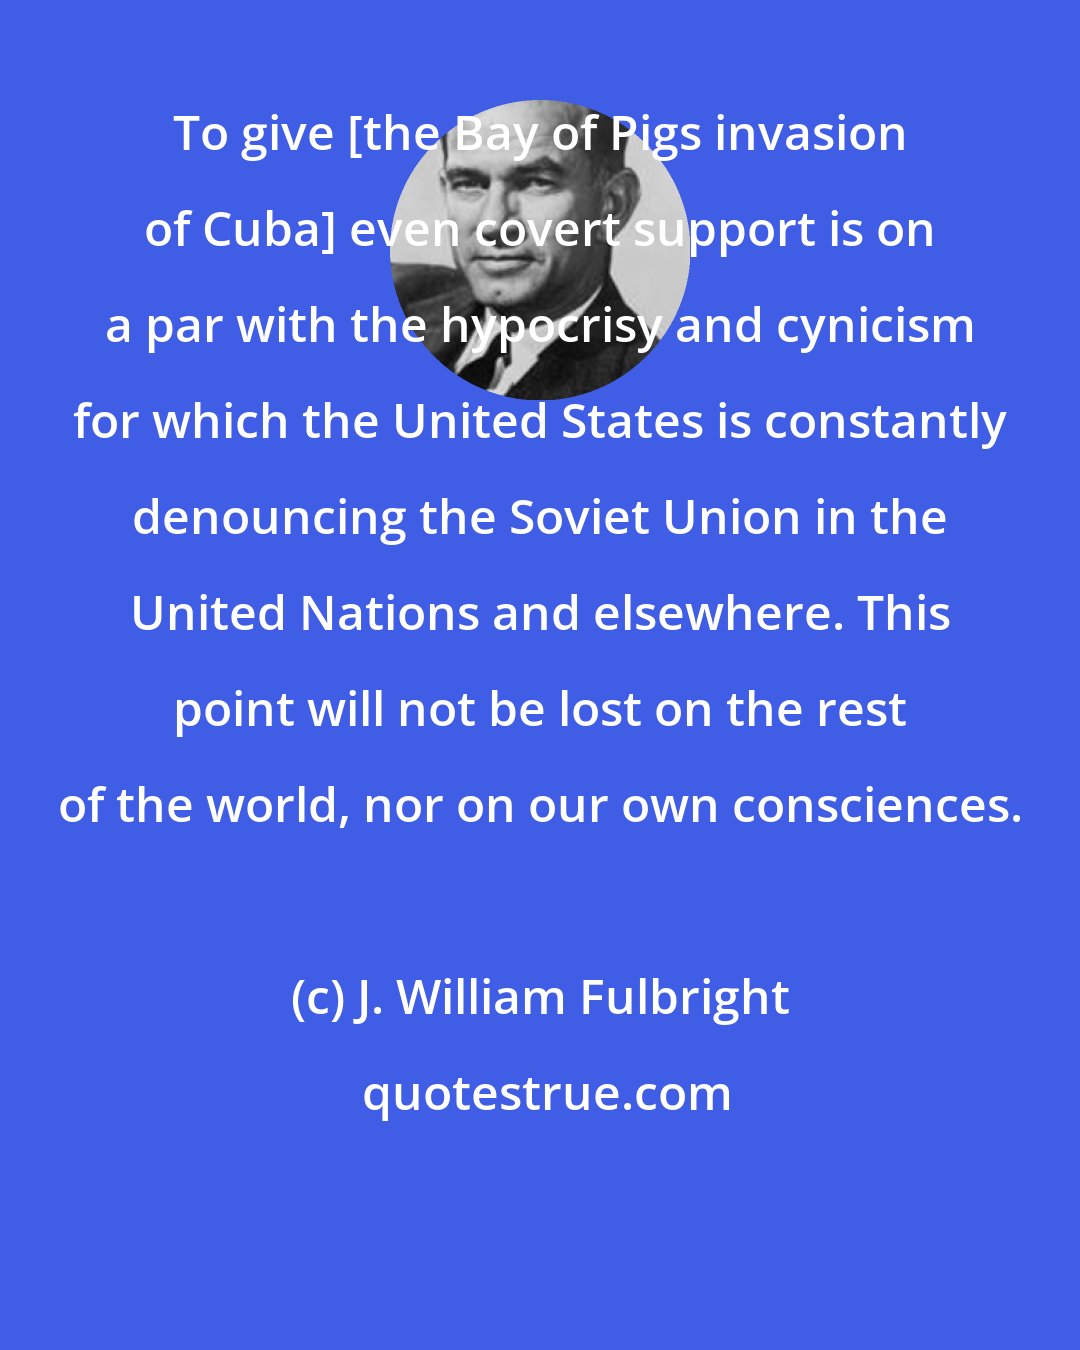 J. William Fulbright: To give [the Bay of Pigs invasion of Cuba] even covert support is on a par with the hypocrisy and cynicism for which the United States is constantly denouncing the Soviet Union in the United Nations and elsewhere. This point will not be lost on the rest of the world, nor on our own consciences.